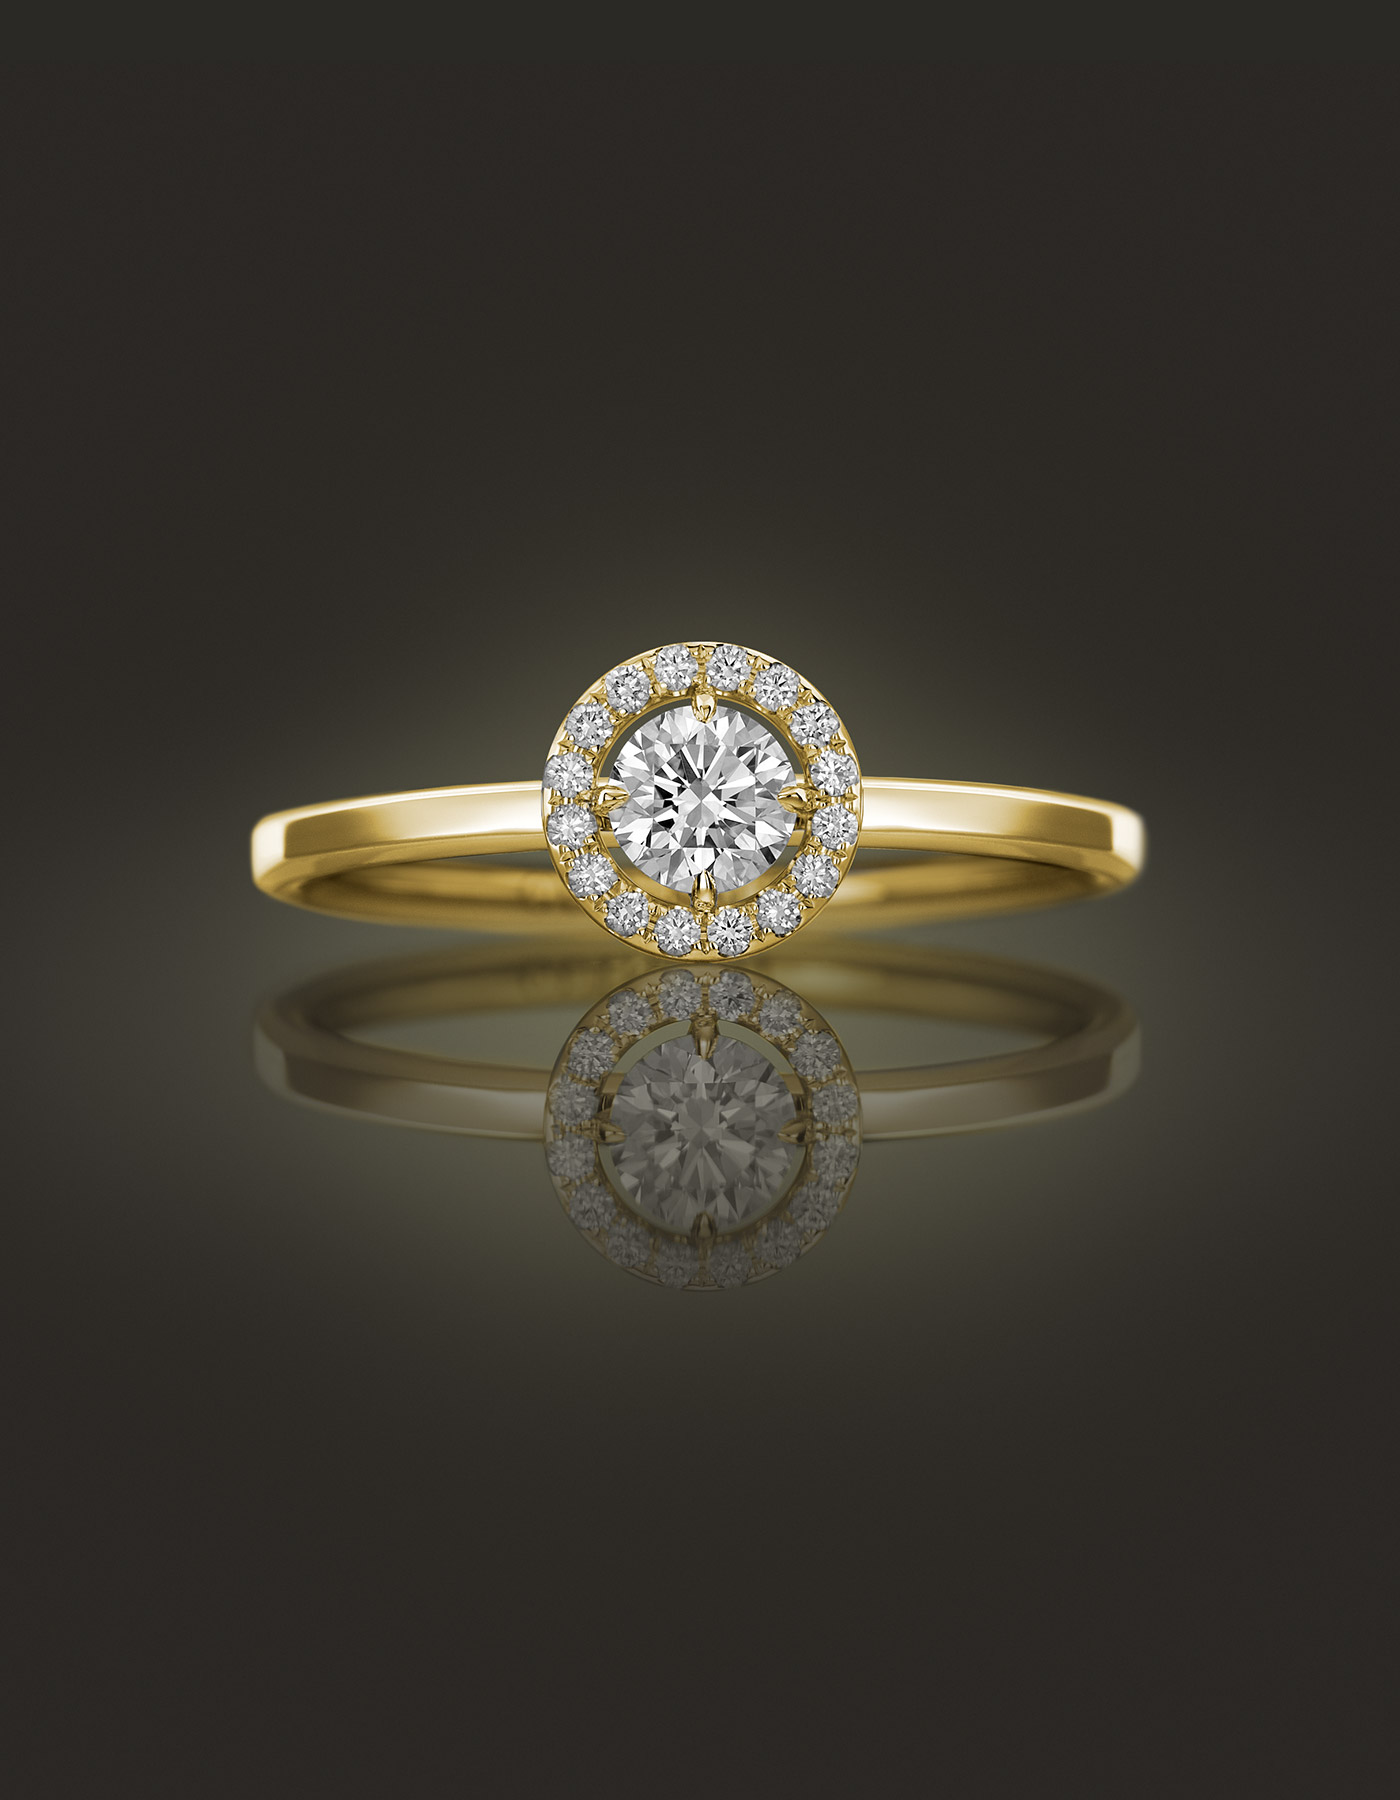 Guinnot Anonymous Halo diamond ring in 18k yellow gold